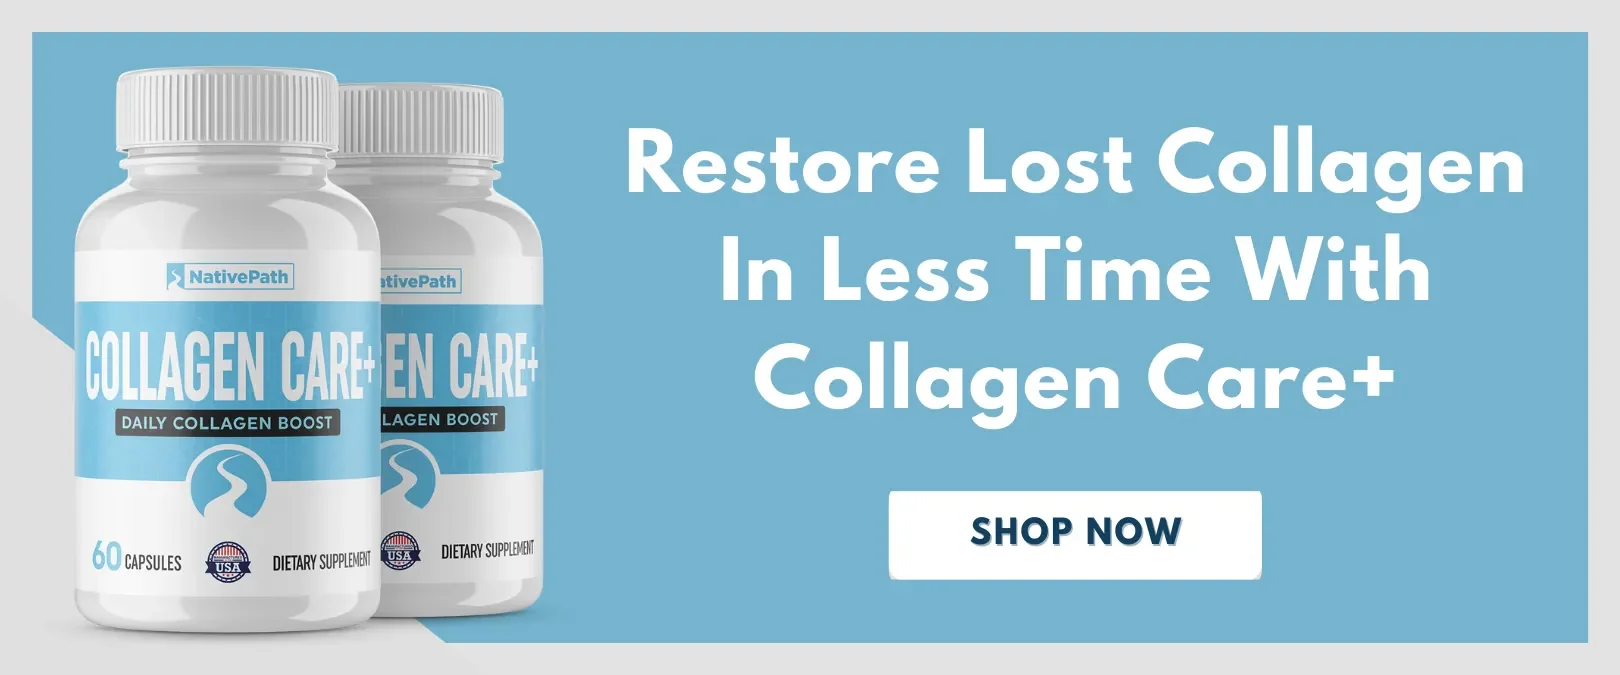 Restore Lost Collagen in Less Time with NativePath Collagen Care+